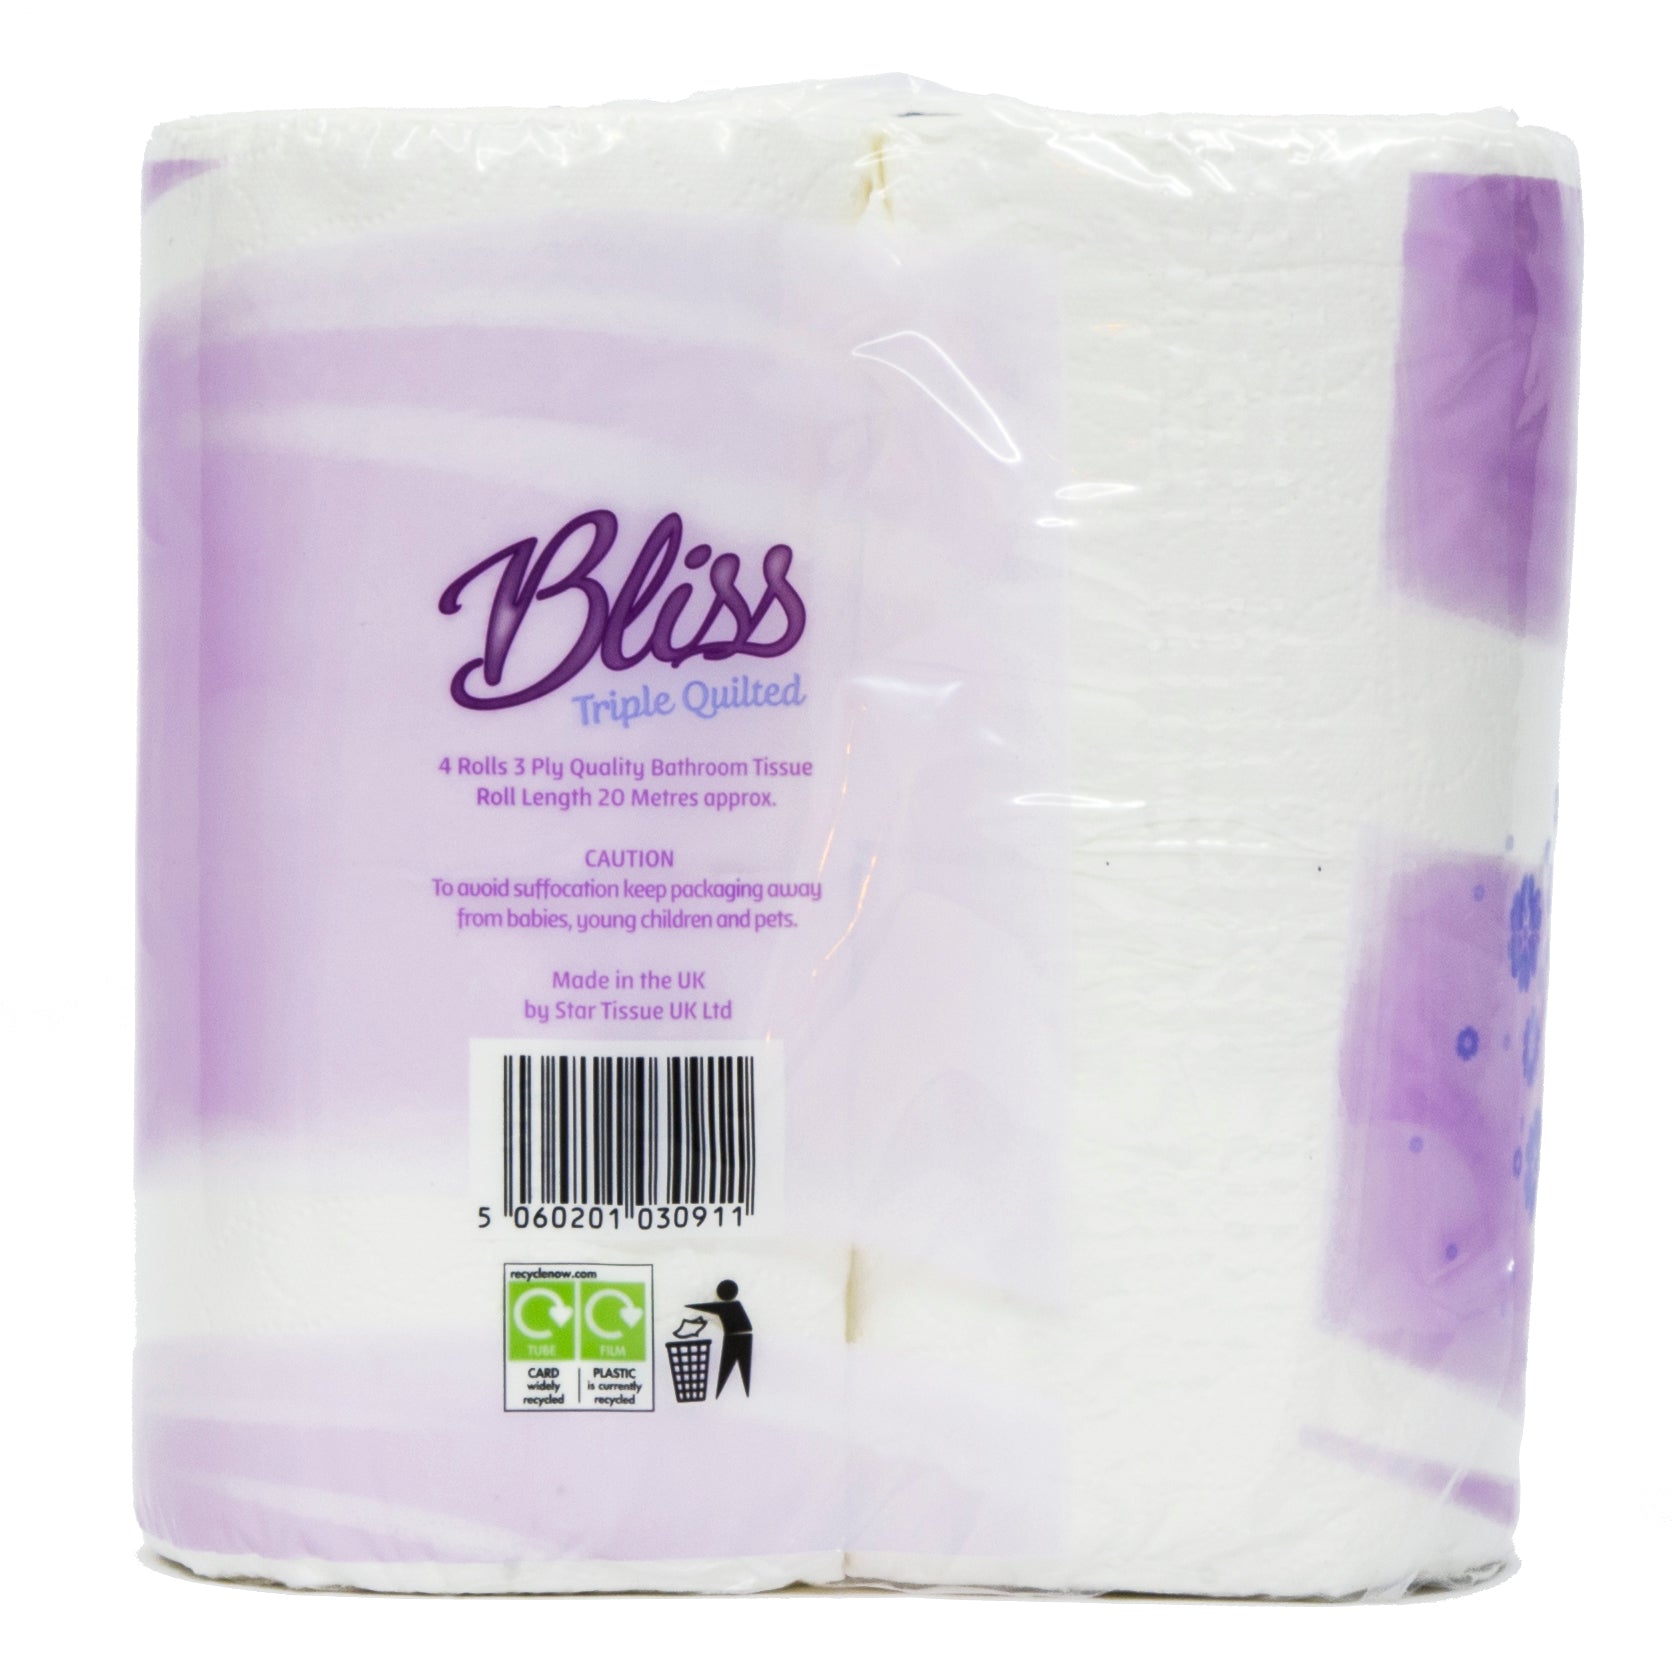 Bliss Triple Quilted Luxury Toilet Paper Pack